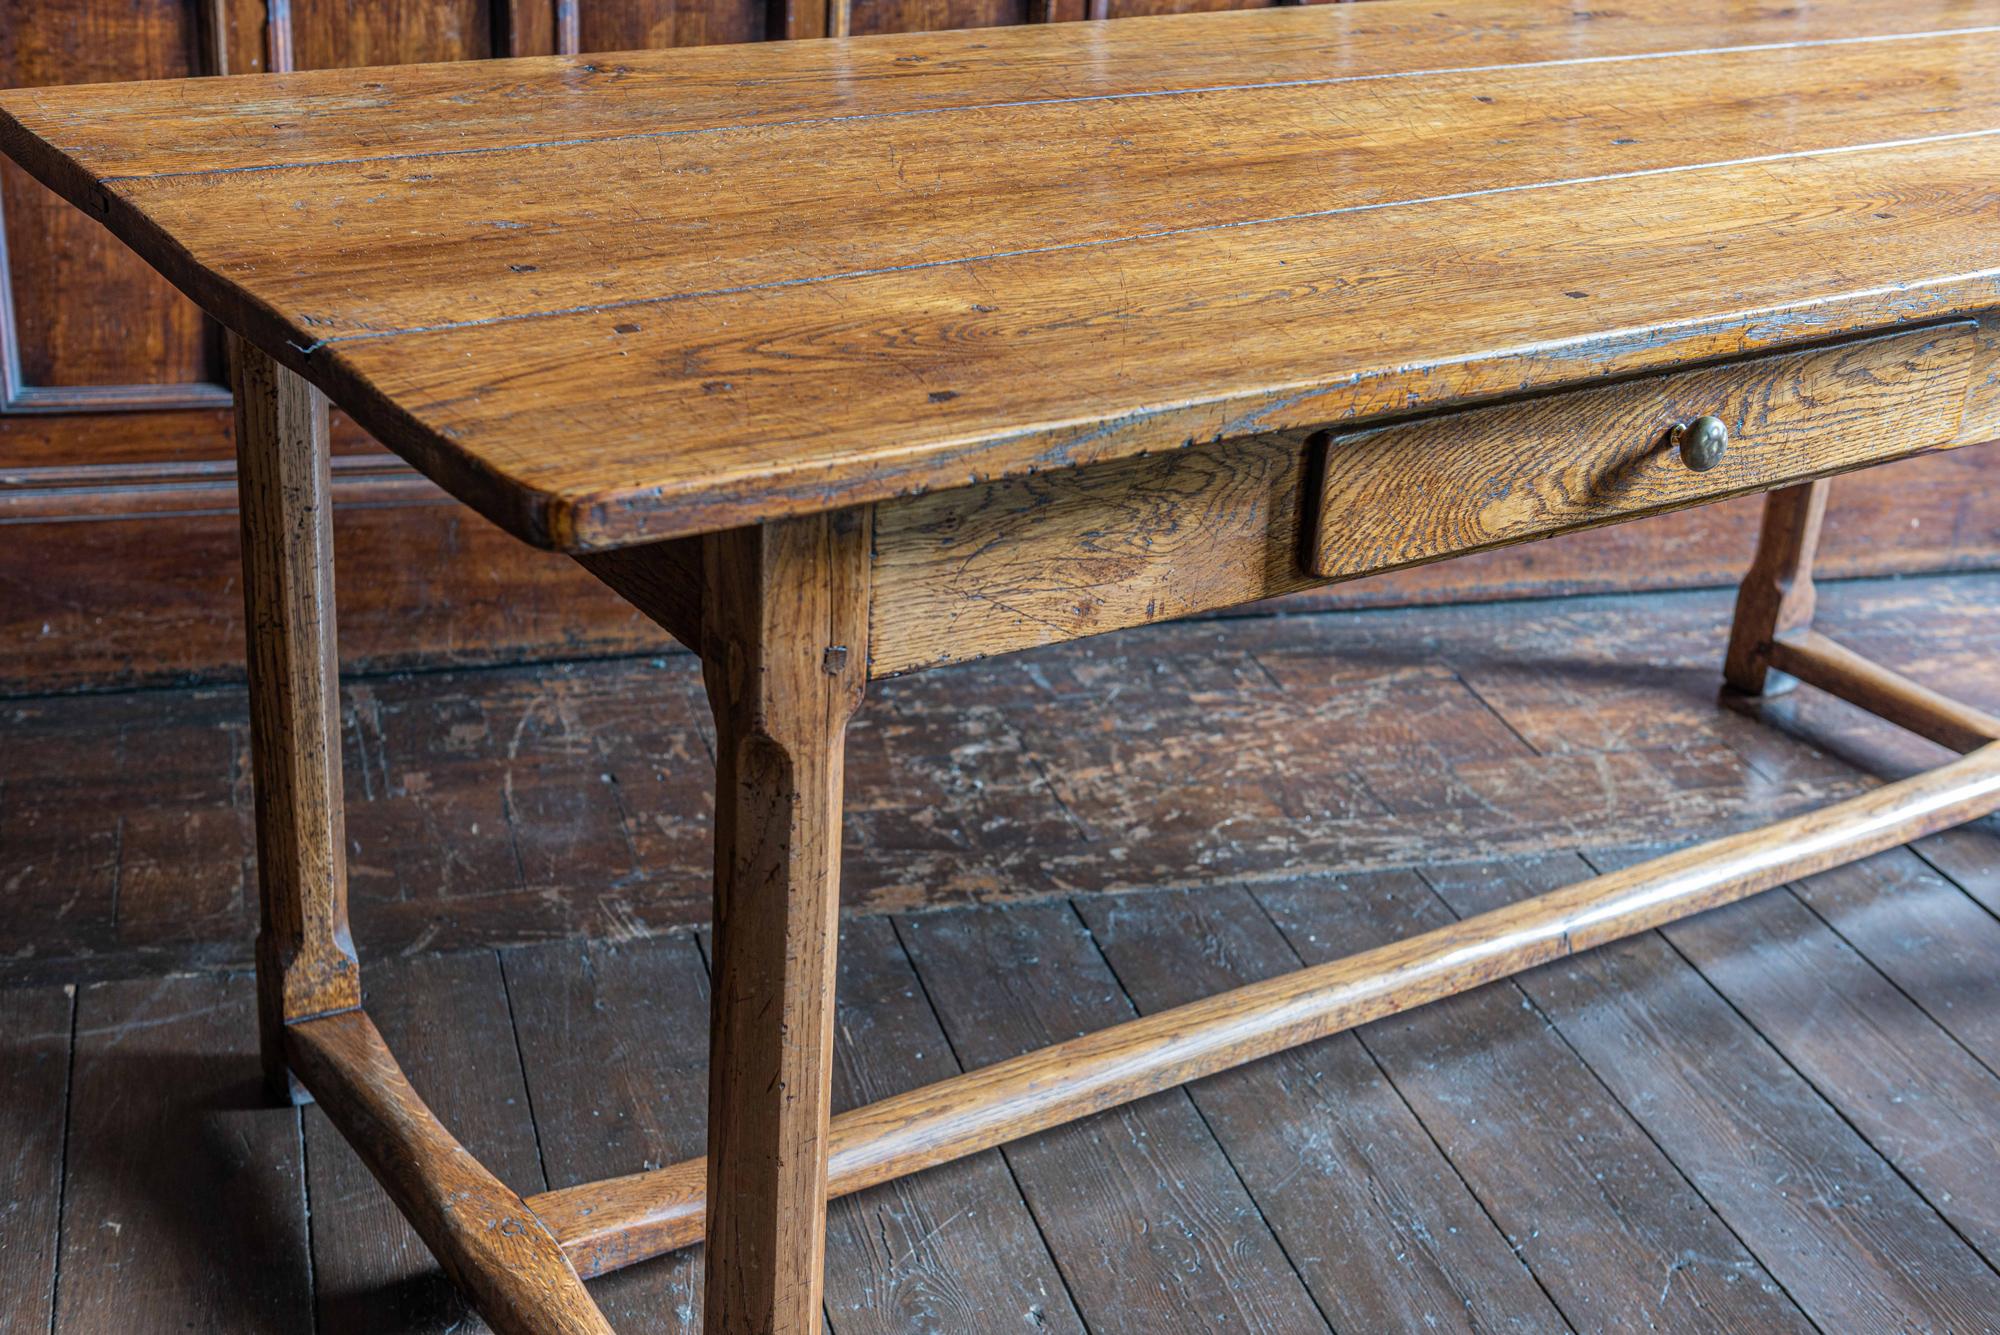 French 18th century oak farmhouse refectory table
circa 1780.

3 plank oak top with square oak pegs, warm oak color and centuries old patina and natural wear to the stretchers and top. A deep single cutlery draw dovetailed and solid oak lined off